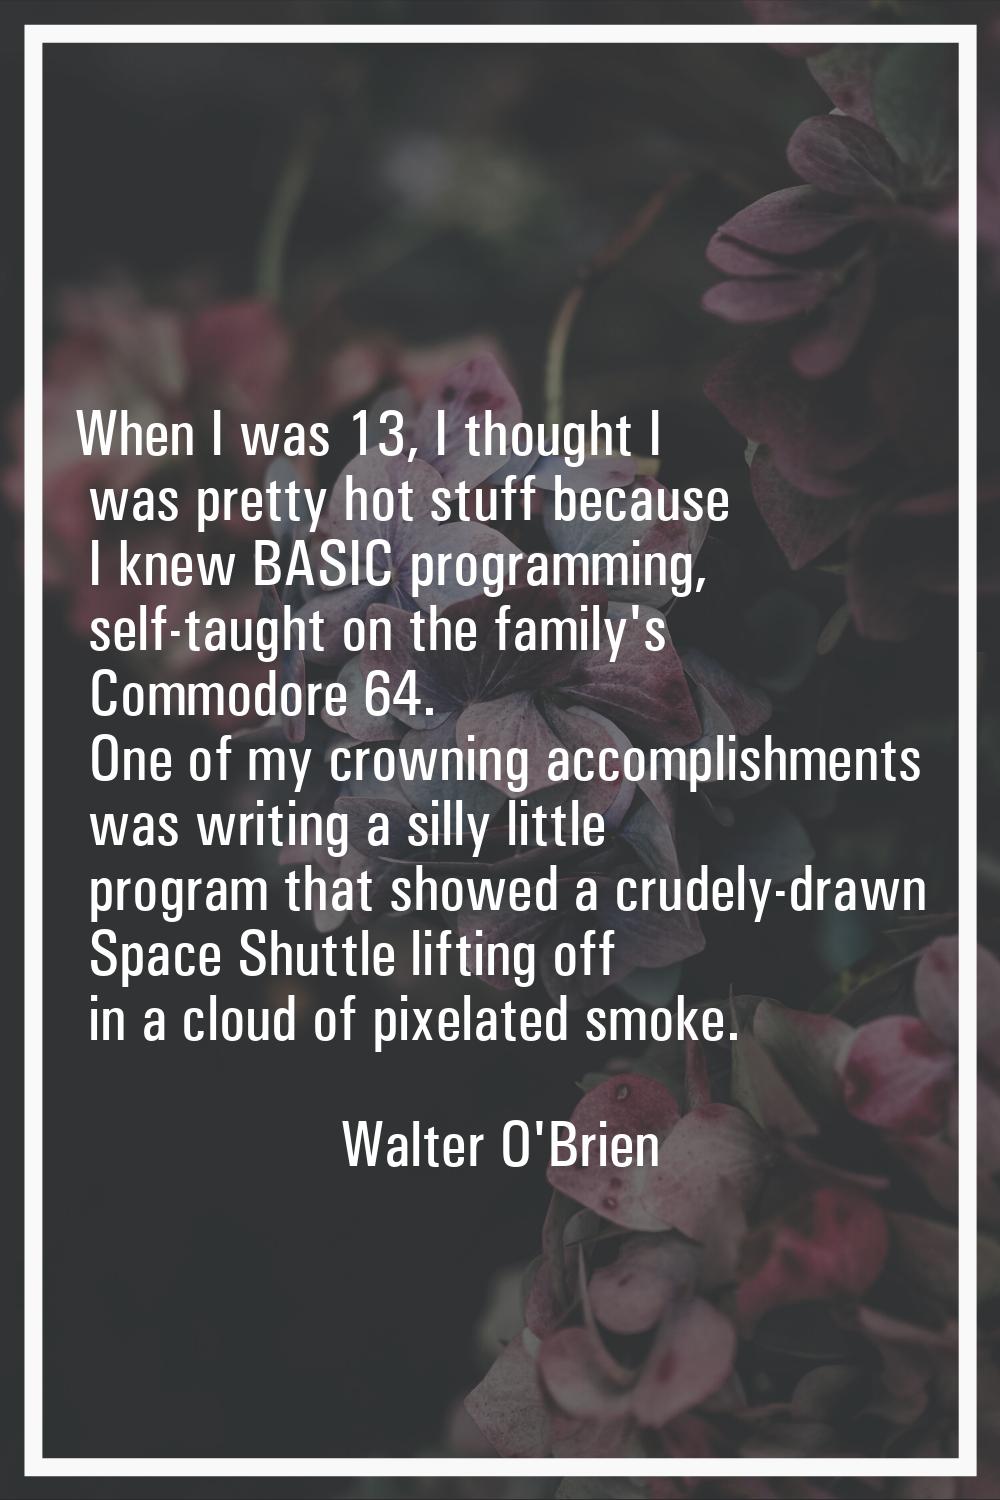 When I was 13, I thought I was pretty hot stuff because I knew BASIC programming, self-taught on th